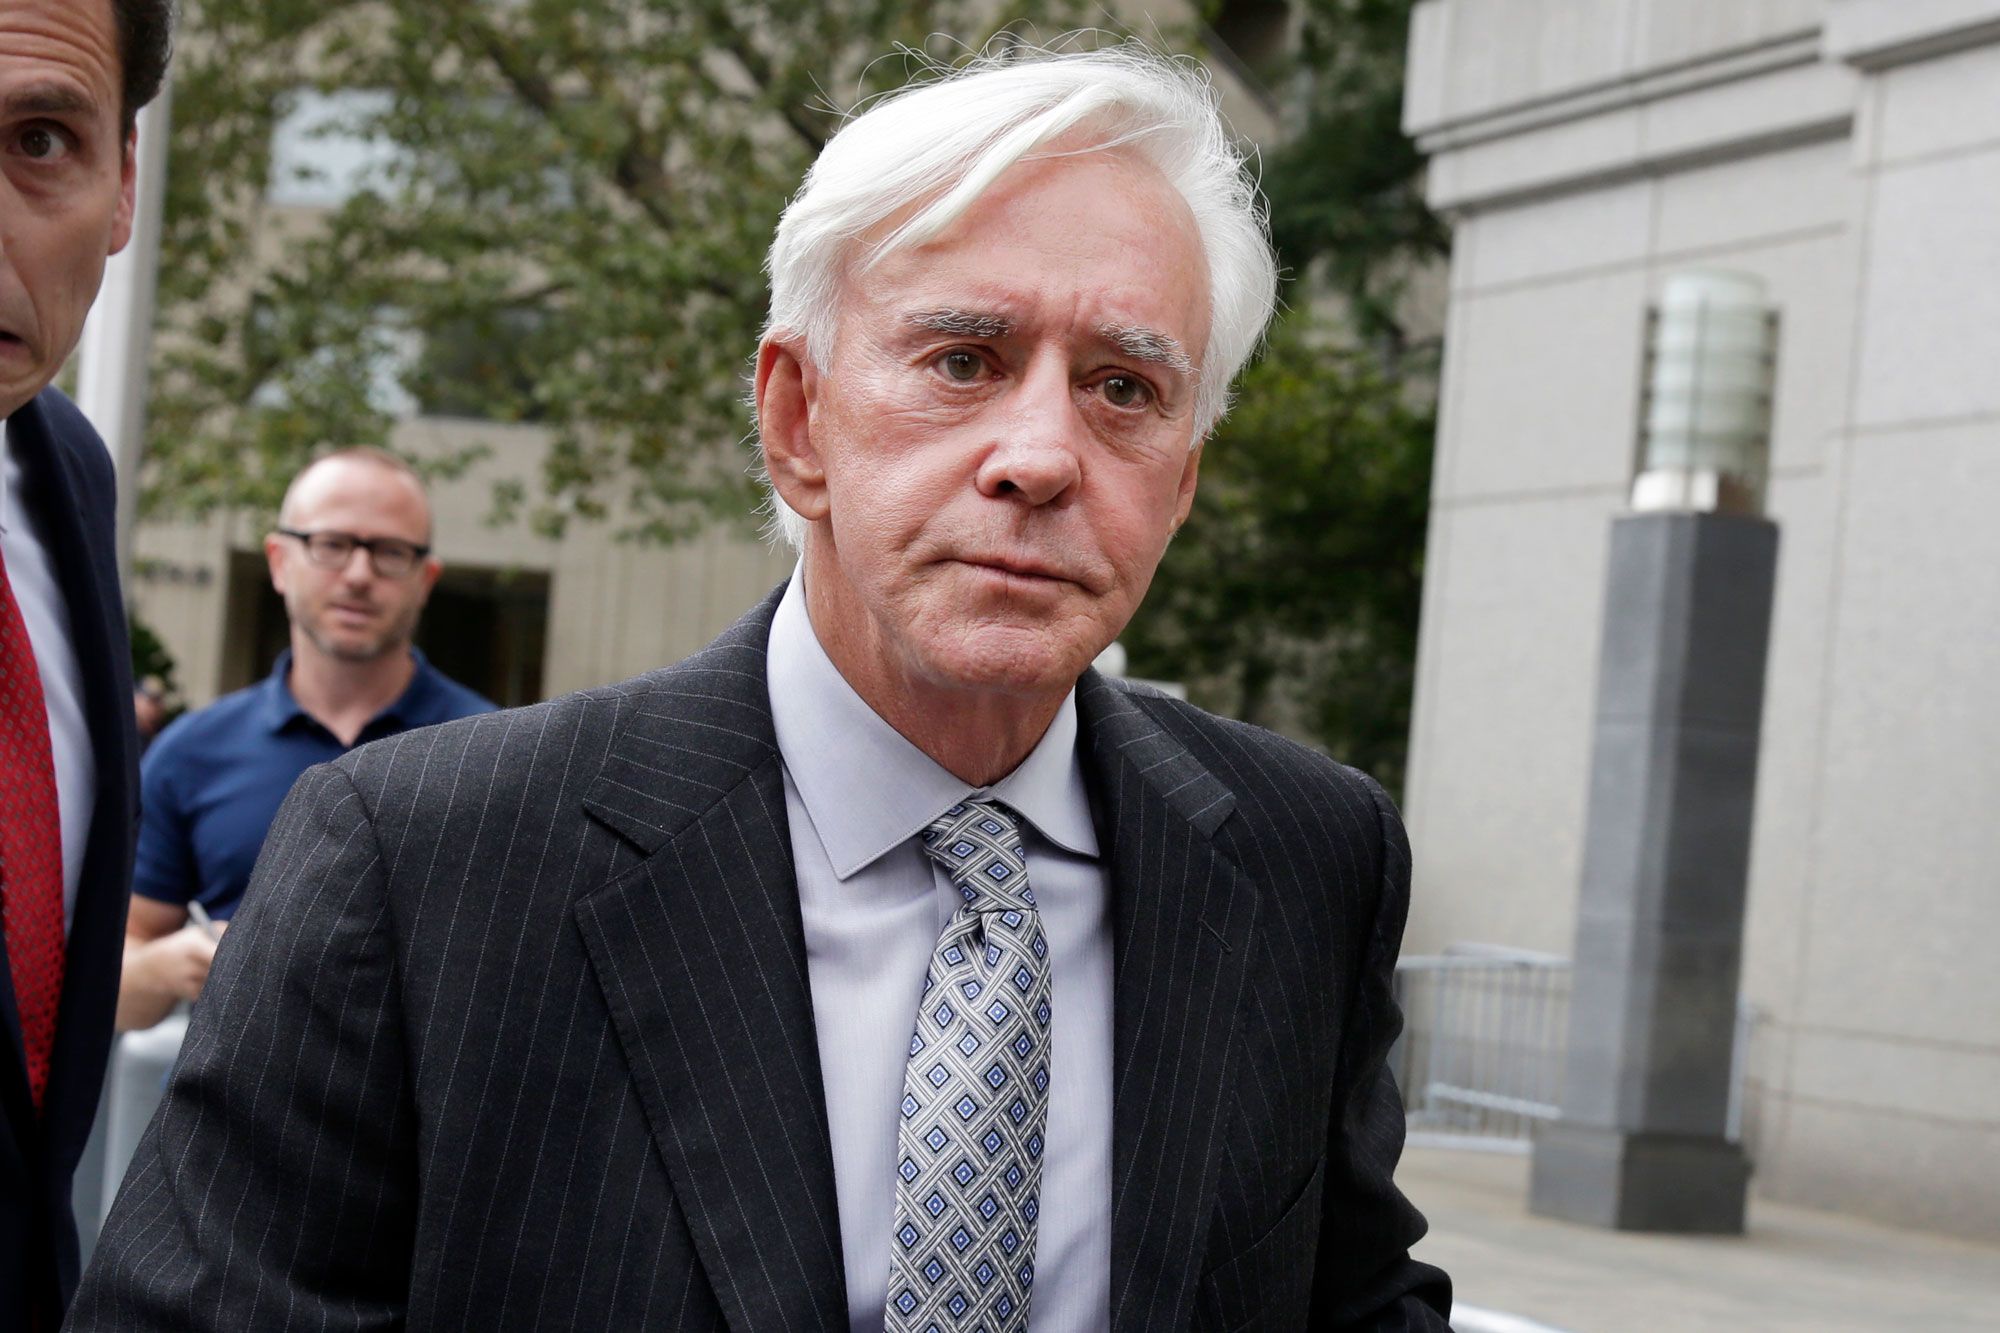 Sports Bettor Billy Walters Insider Trading Appeal Rejected by SCOTUS